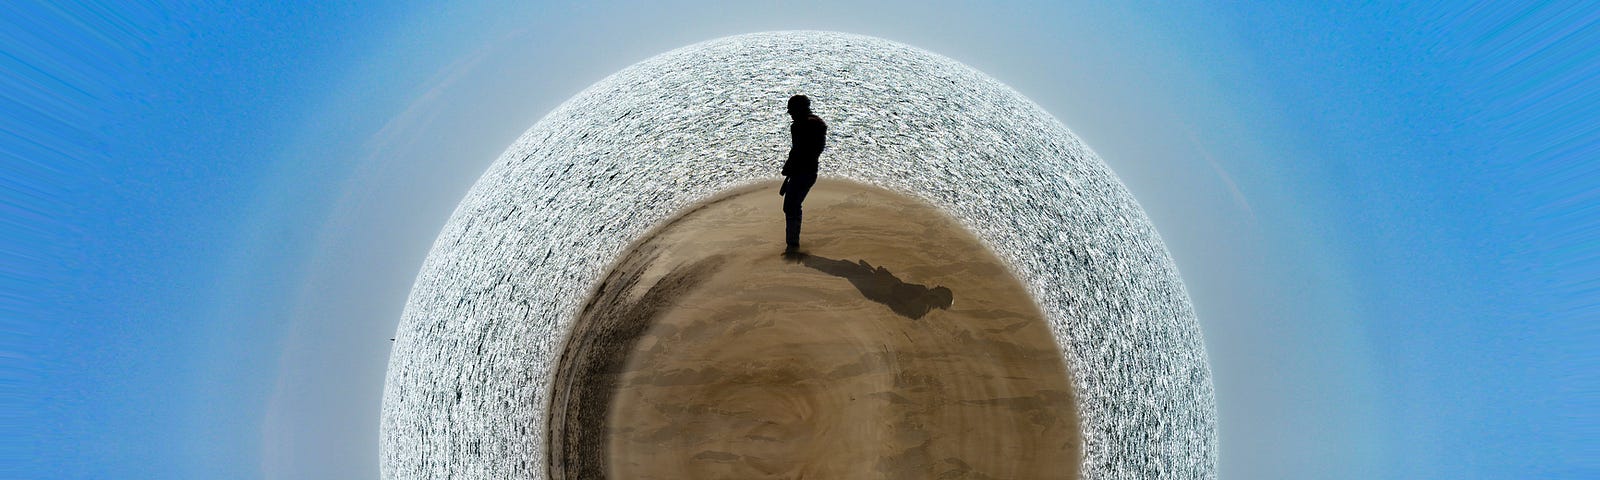 A photo of a man standing in a sphere desert.